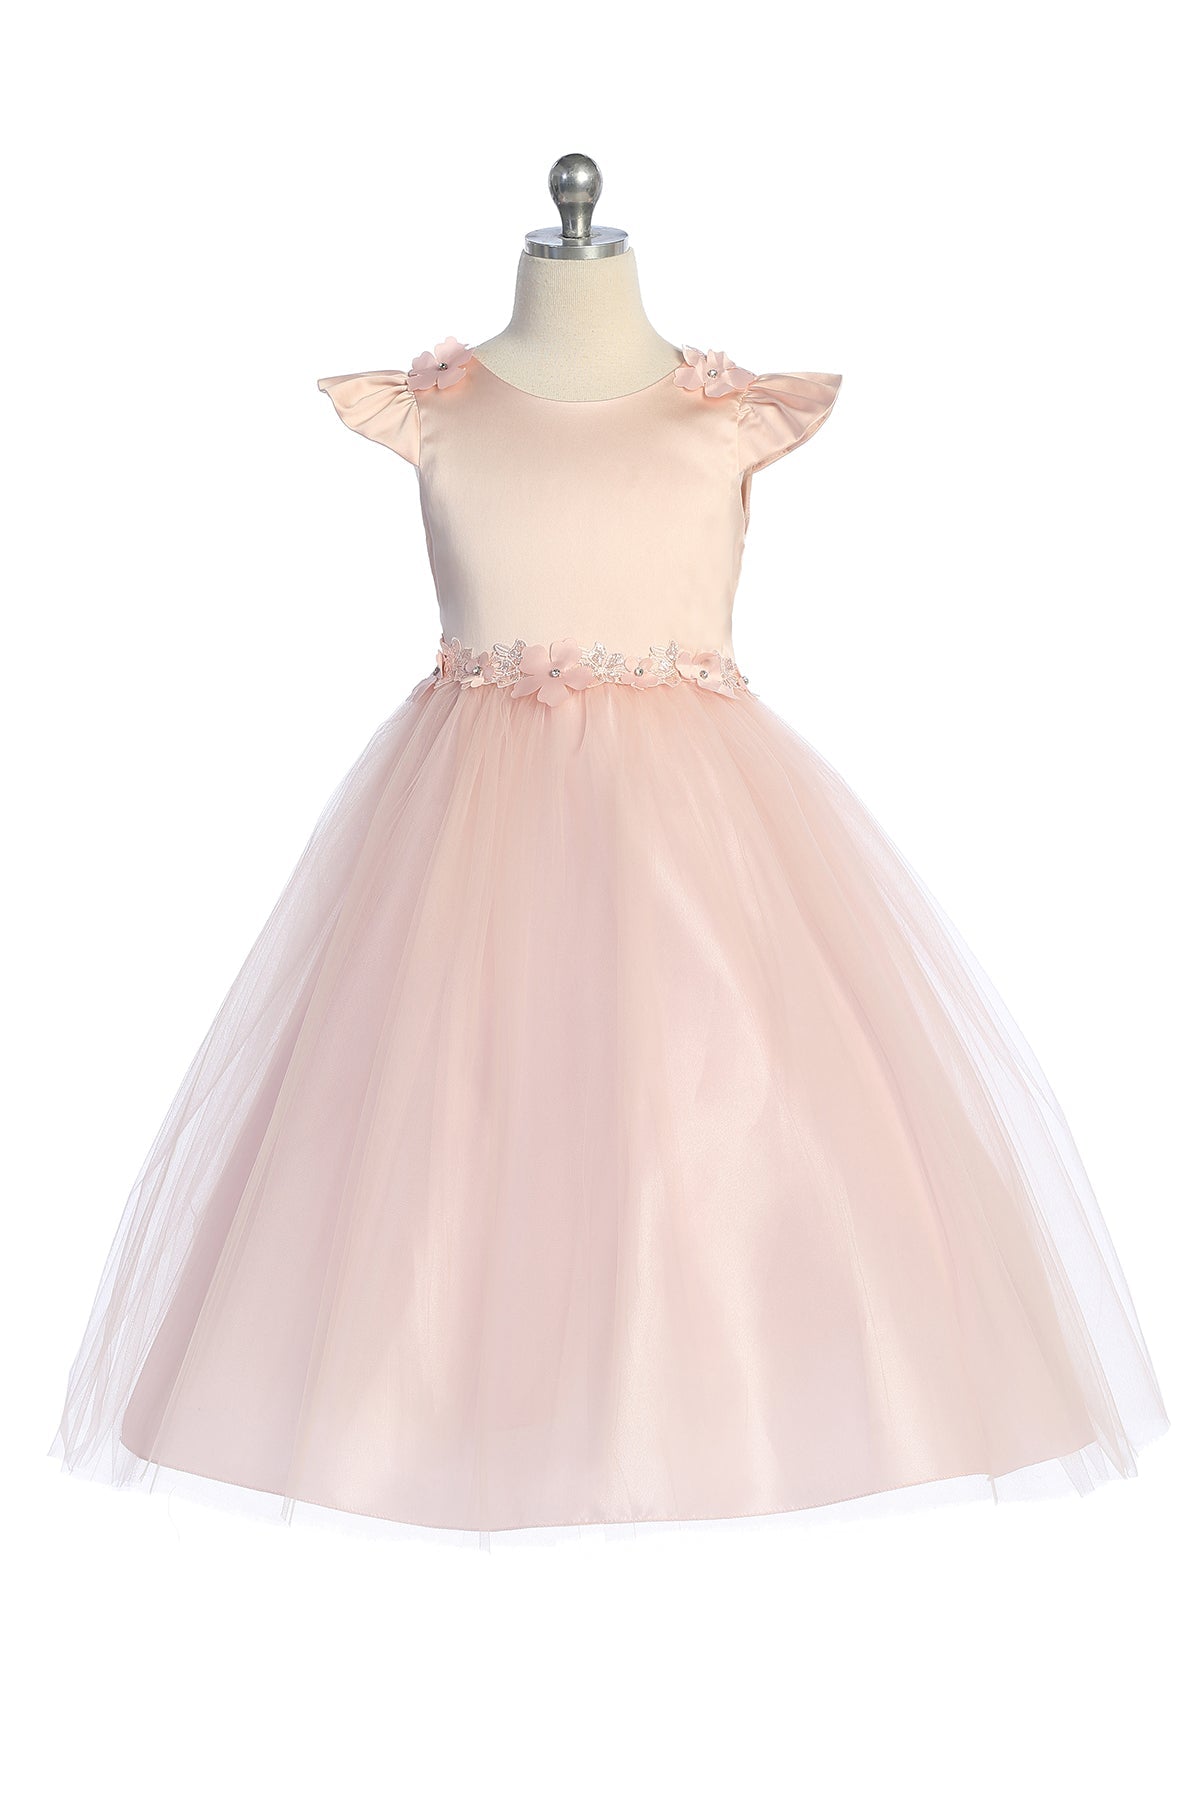 Dress - Capped Sleeve Satin & Tulle Girls Dress With Floral Trim